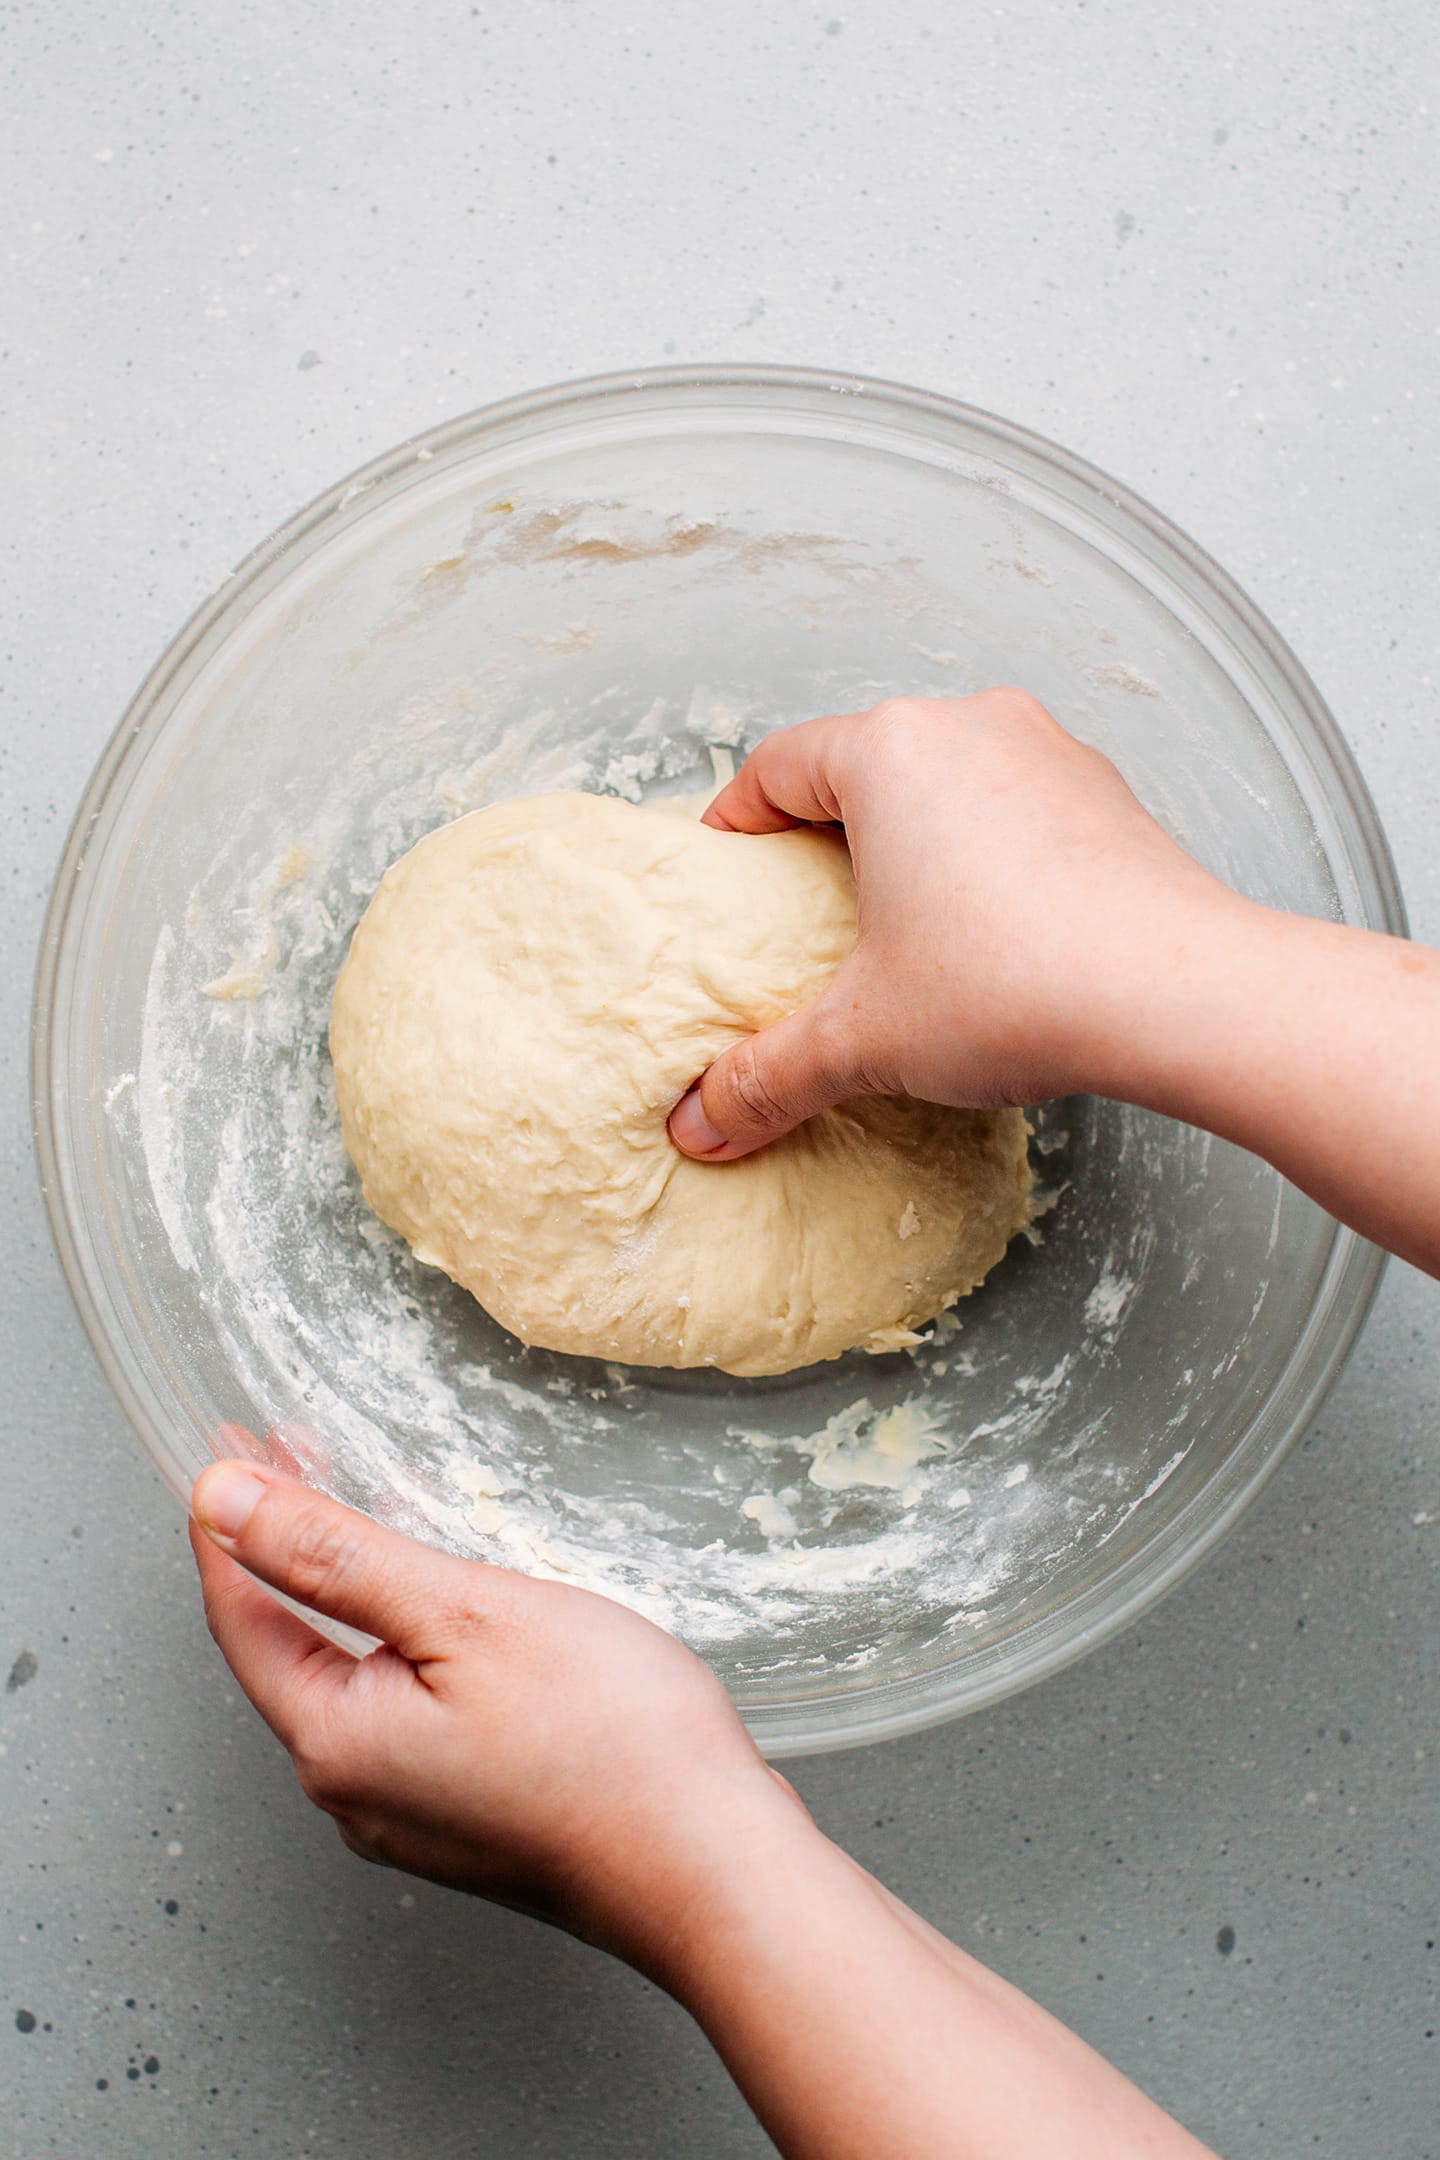 Kneading dough in a mixing bowl.